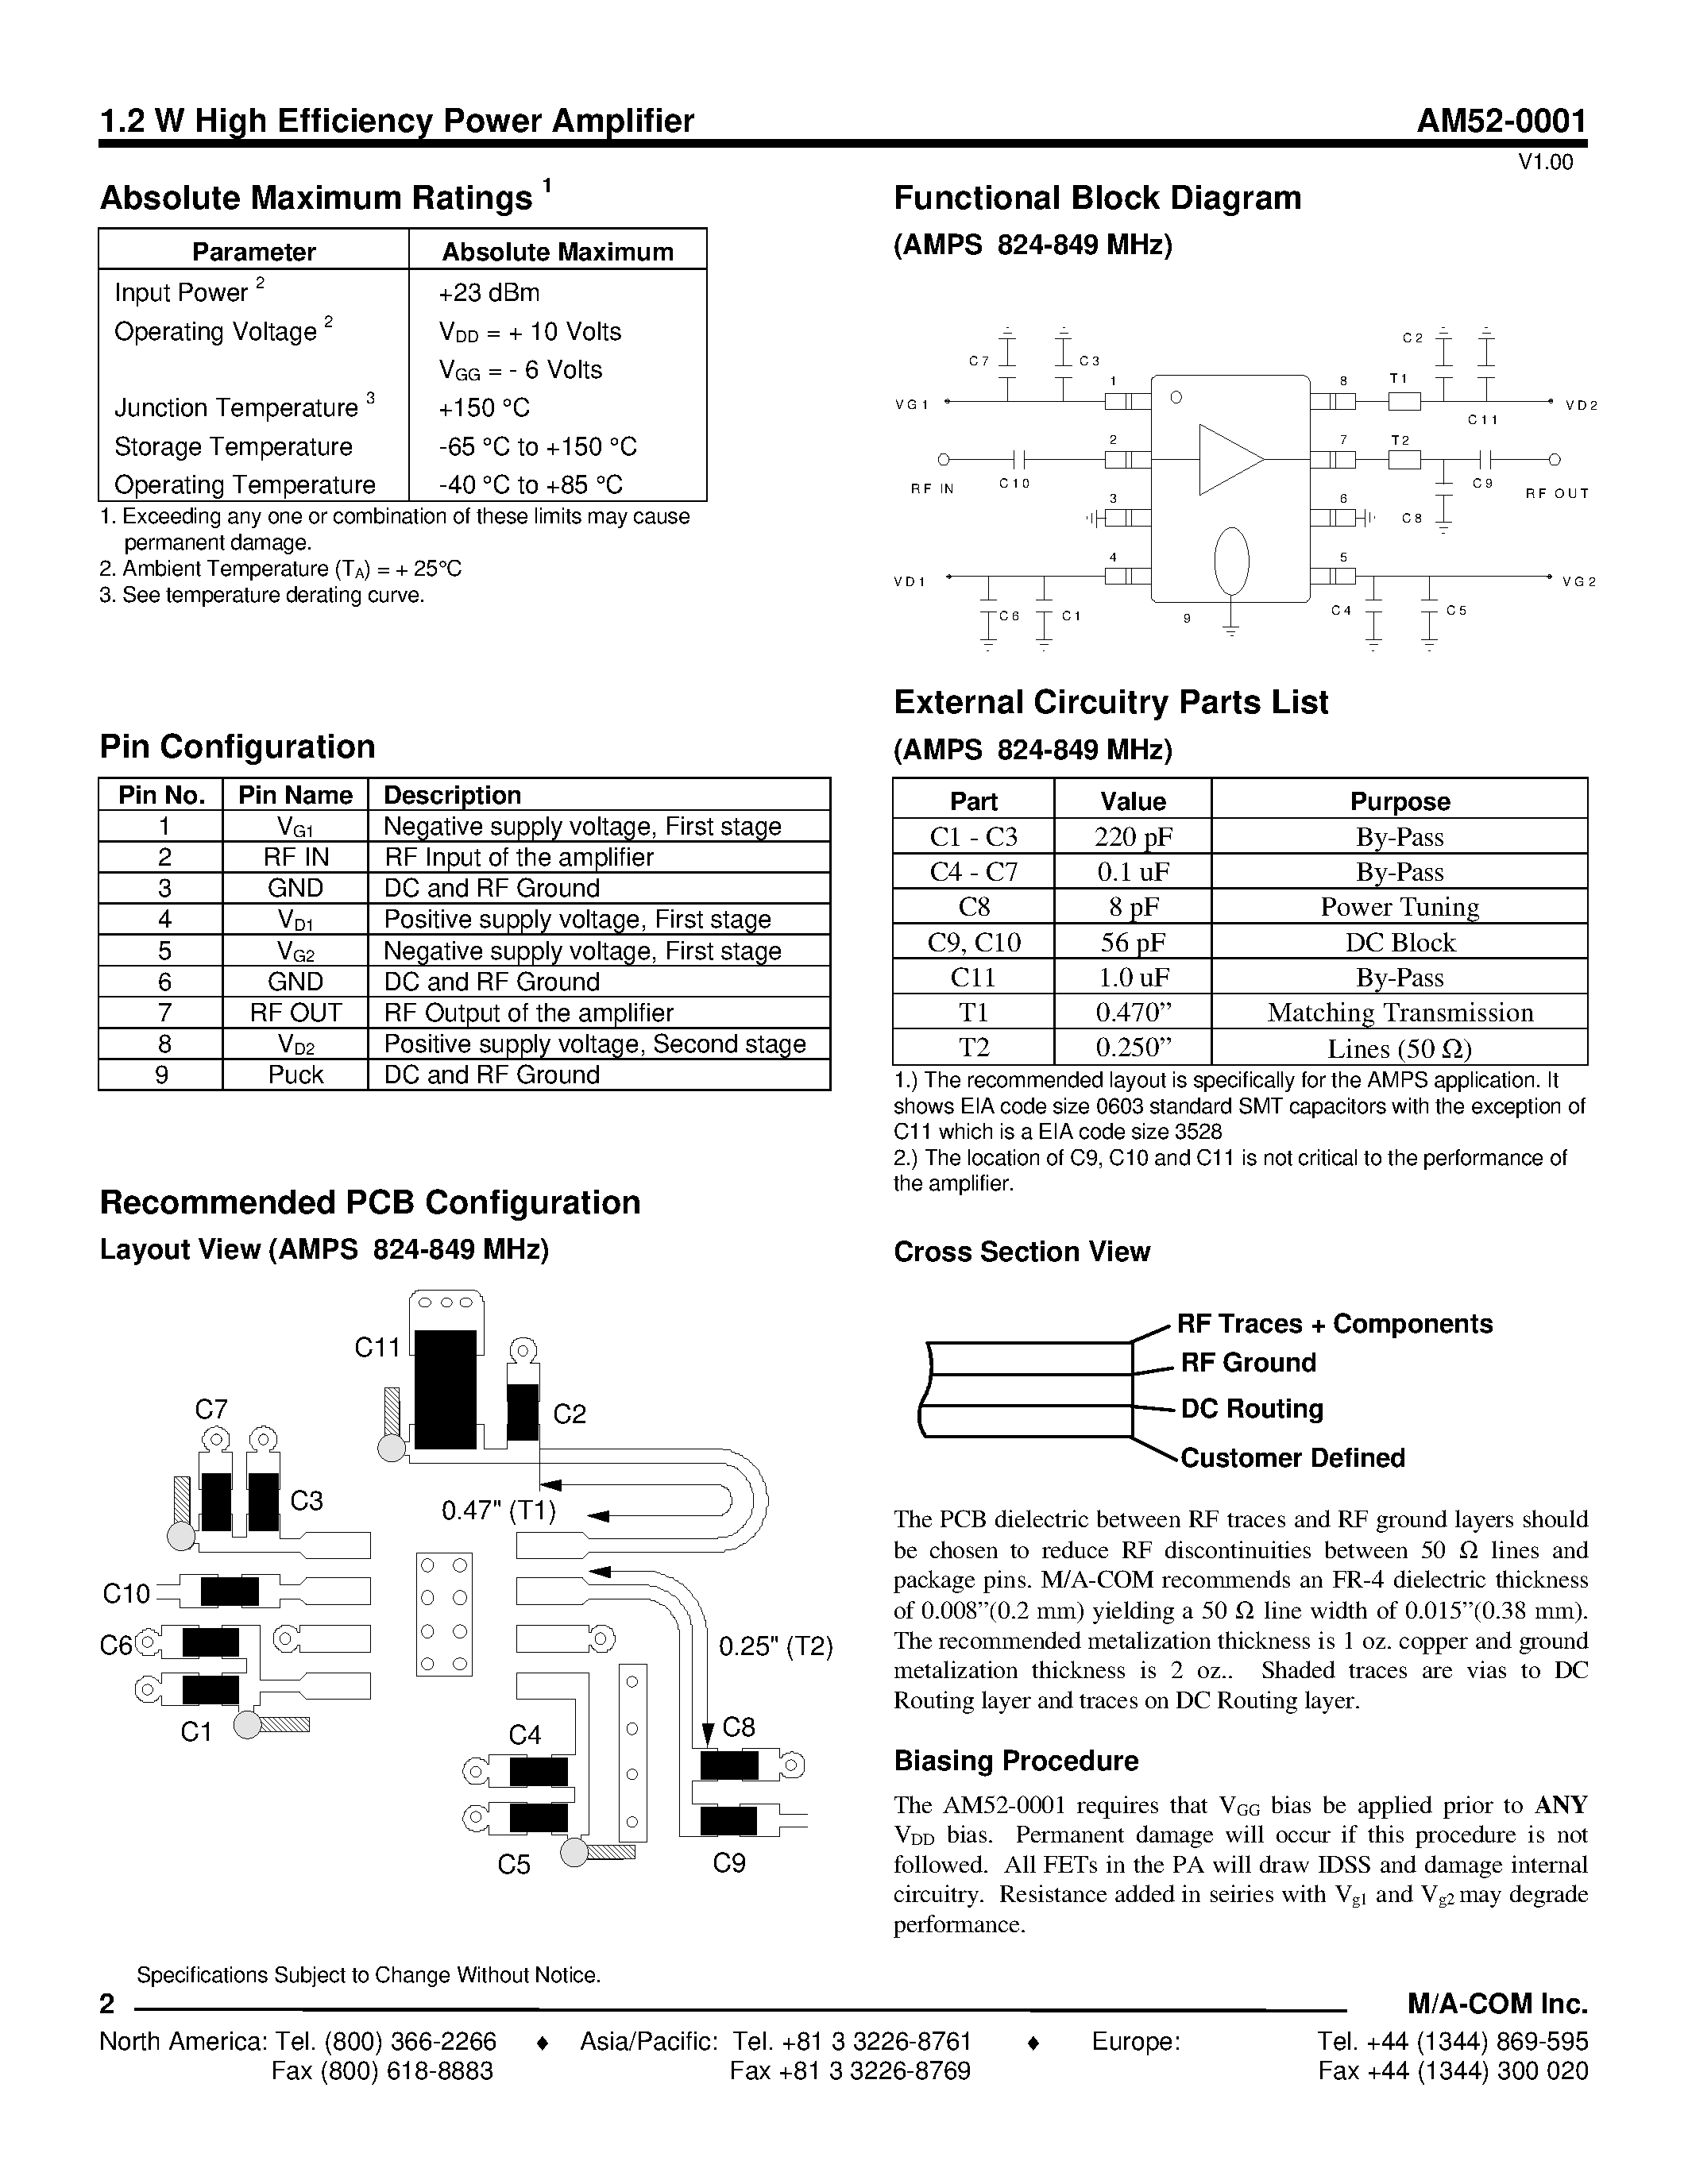 Datasheet AM52-0001SMB - 1.2 W High Efficiency Power Amplifier 800 - 960 MHz page 2